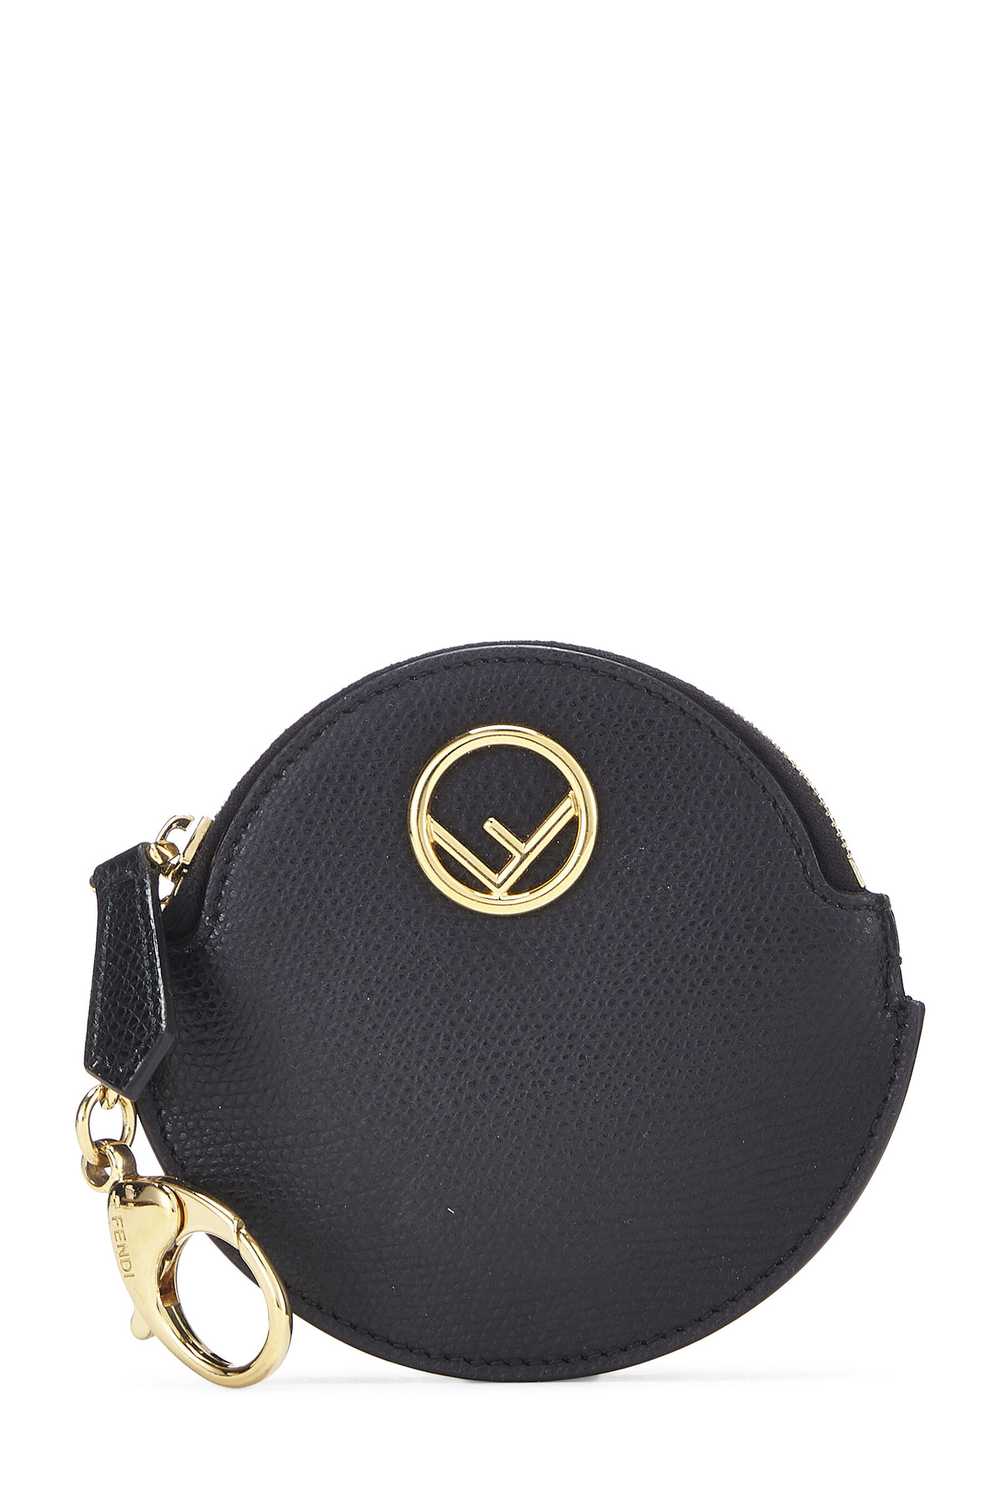 Black Leather Round Coin Purse - image 1